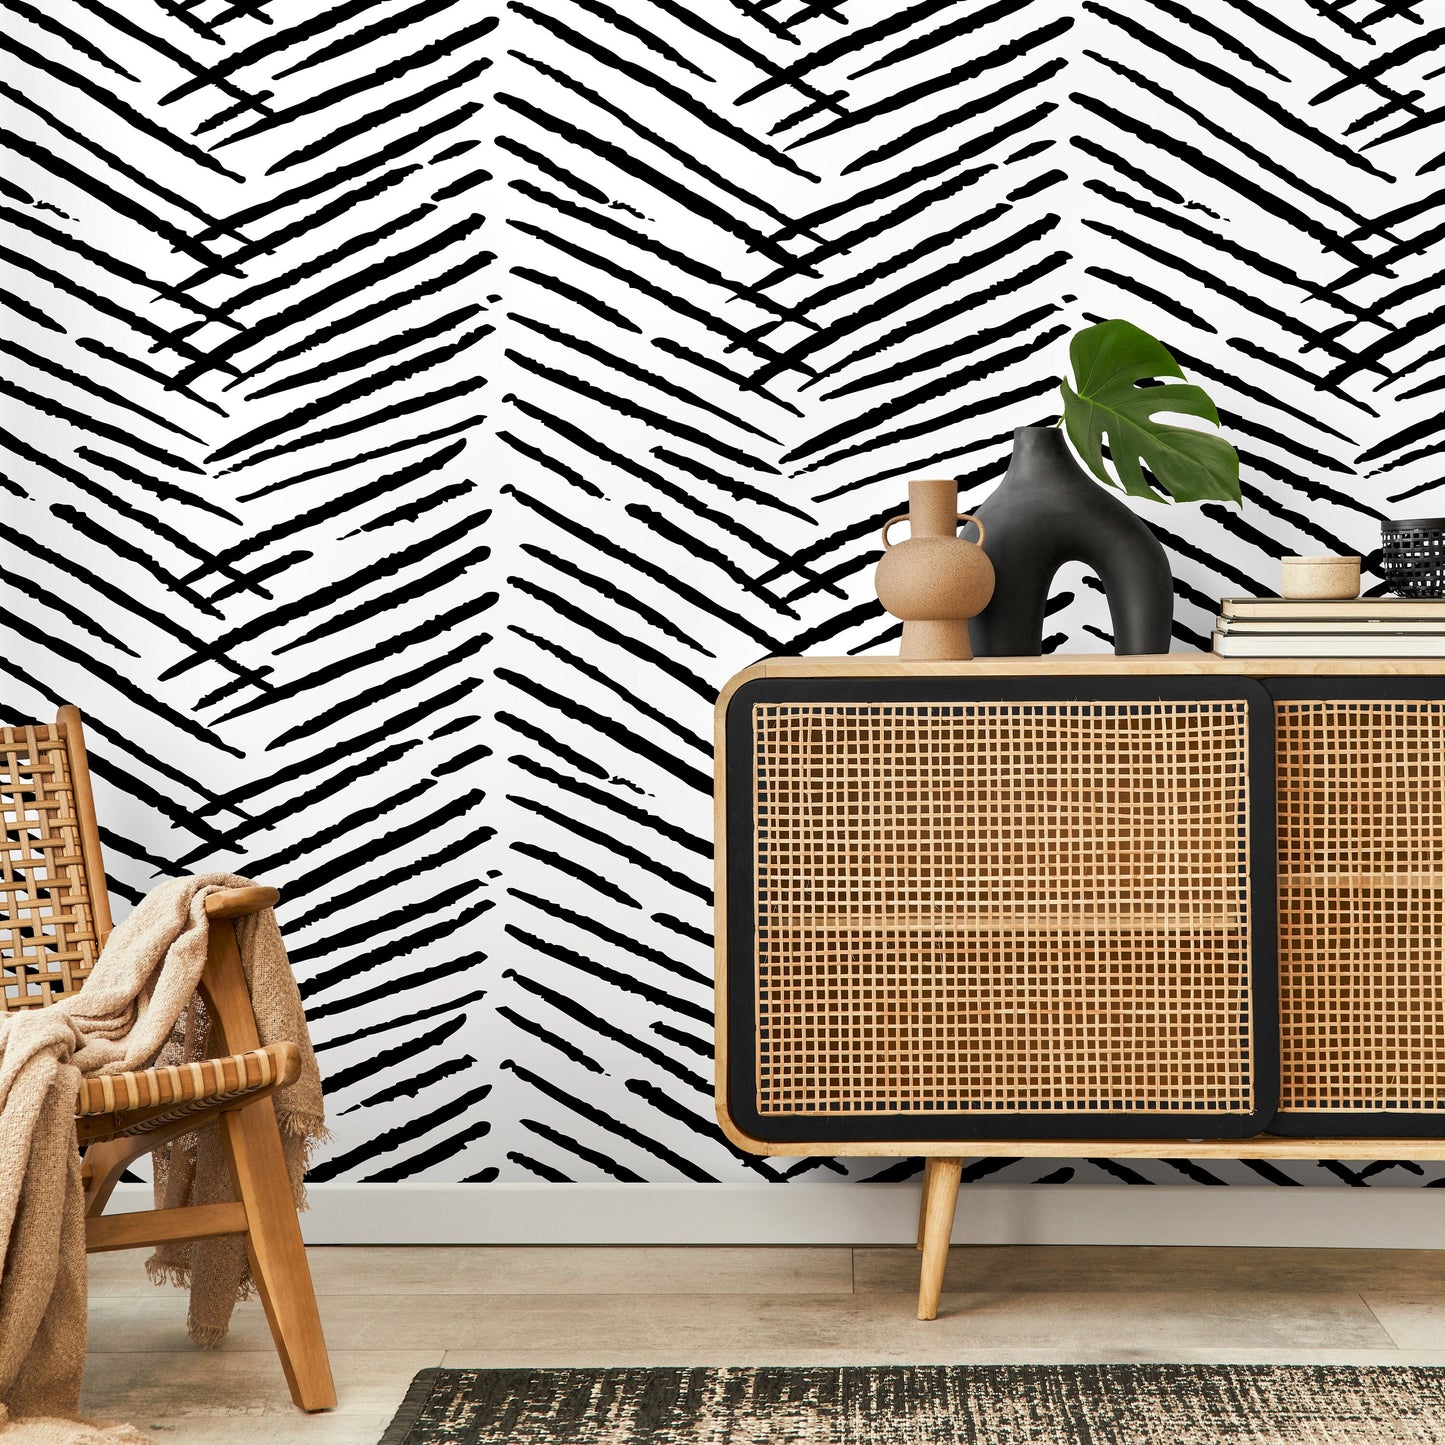 Wallpaper Peel and Stick Wallpaper Removable Wallpaper Home Decor Wall Art Wall Decor Room Decor / Black and White Boho Wallpaper - C518